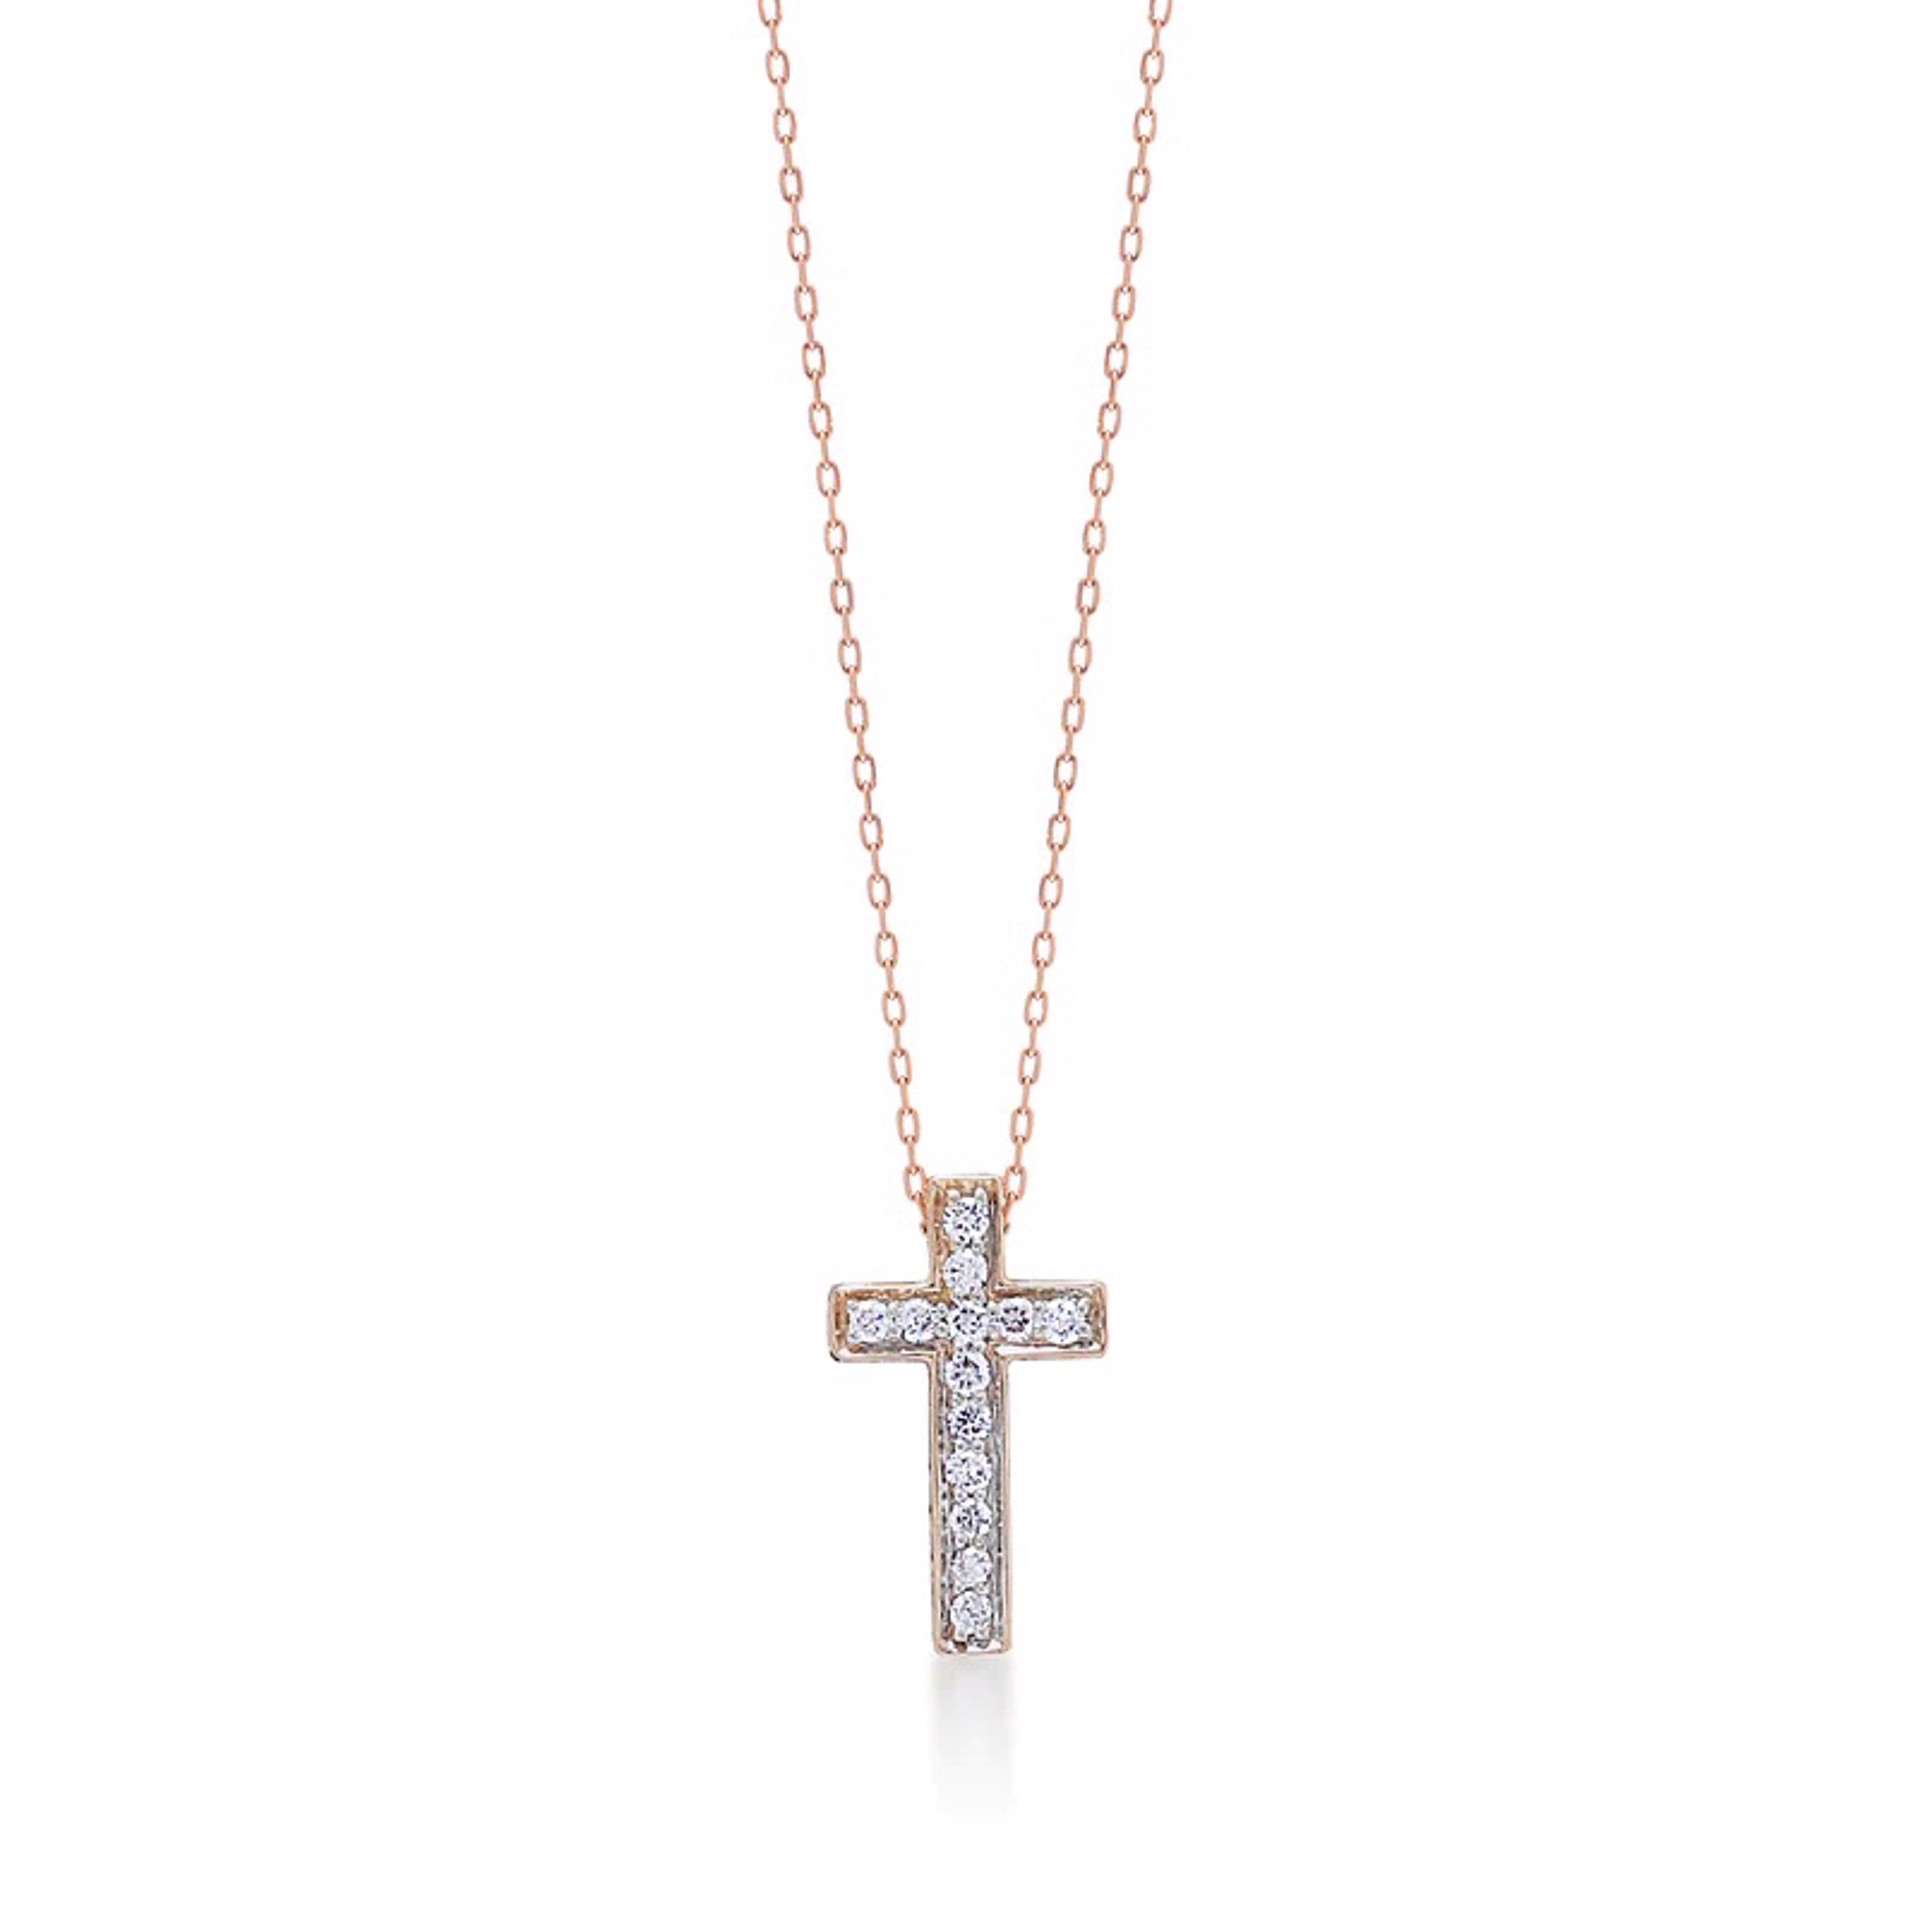 1022 18K Rose Gold and White Diamond (0.13 CT) Cross with Signature Scroll Necklace by Lois Hill